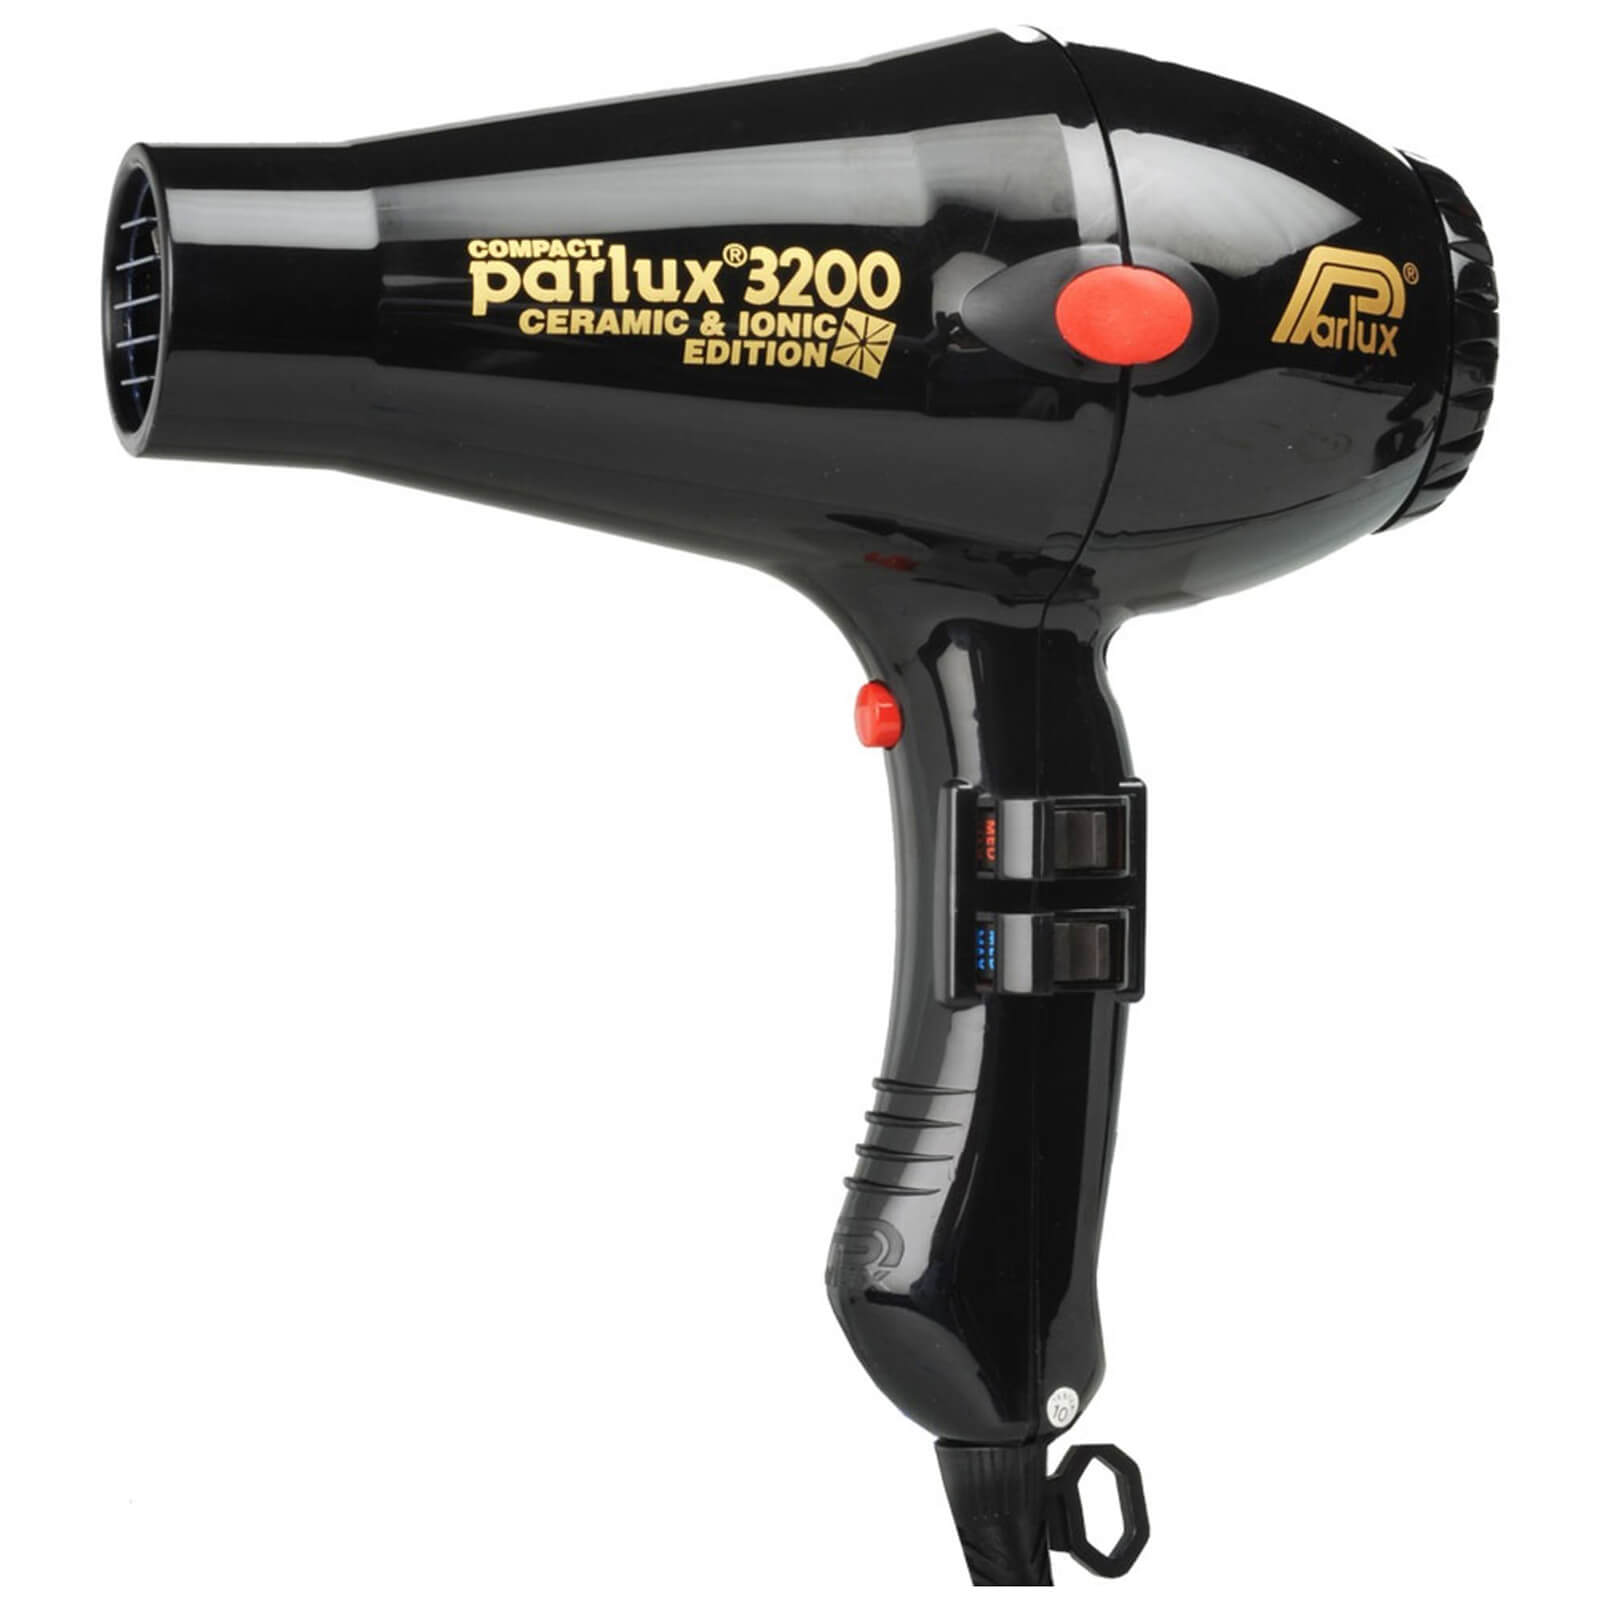 Parlux 3200 Compact Ceramic & Ionic Hair Dryer 1900W (Various Shades) - Black